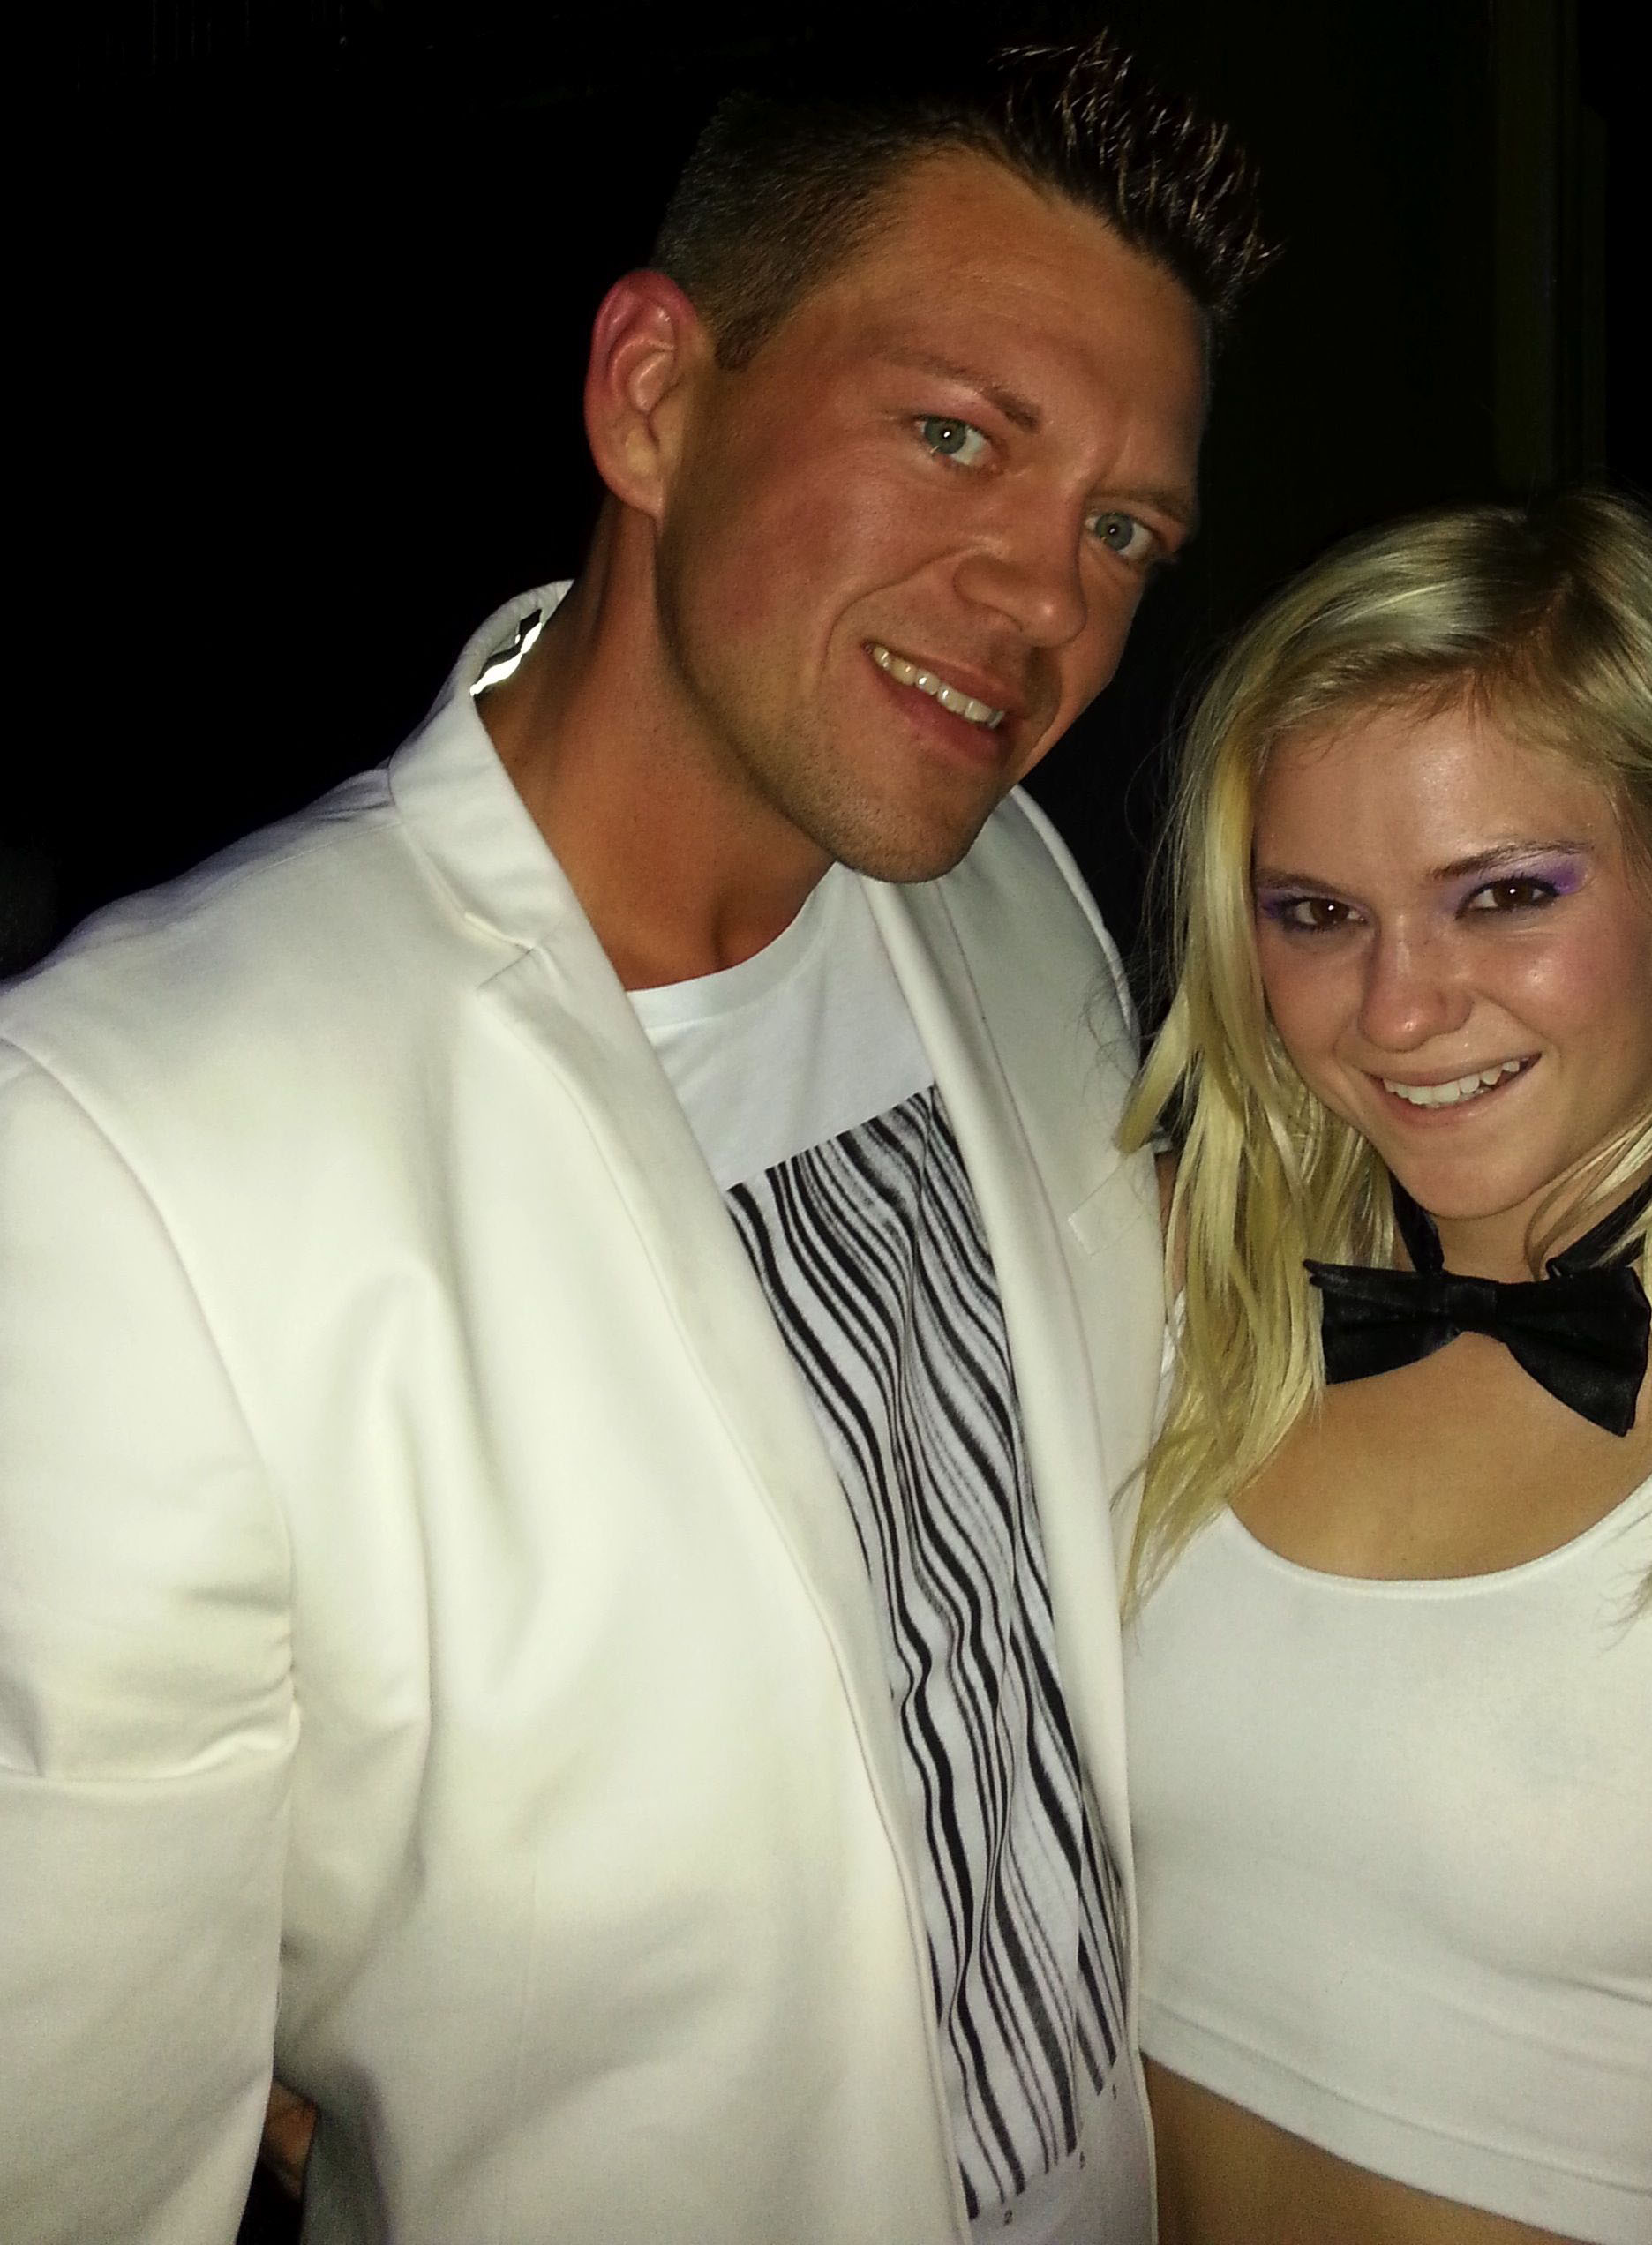 AVN Awards 2014 White Party in Las Vegas. This is a pic of Jamie Stone and Chloe Foster at the party.